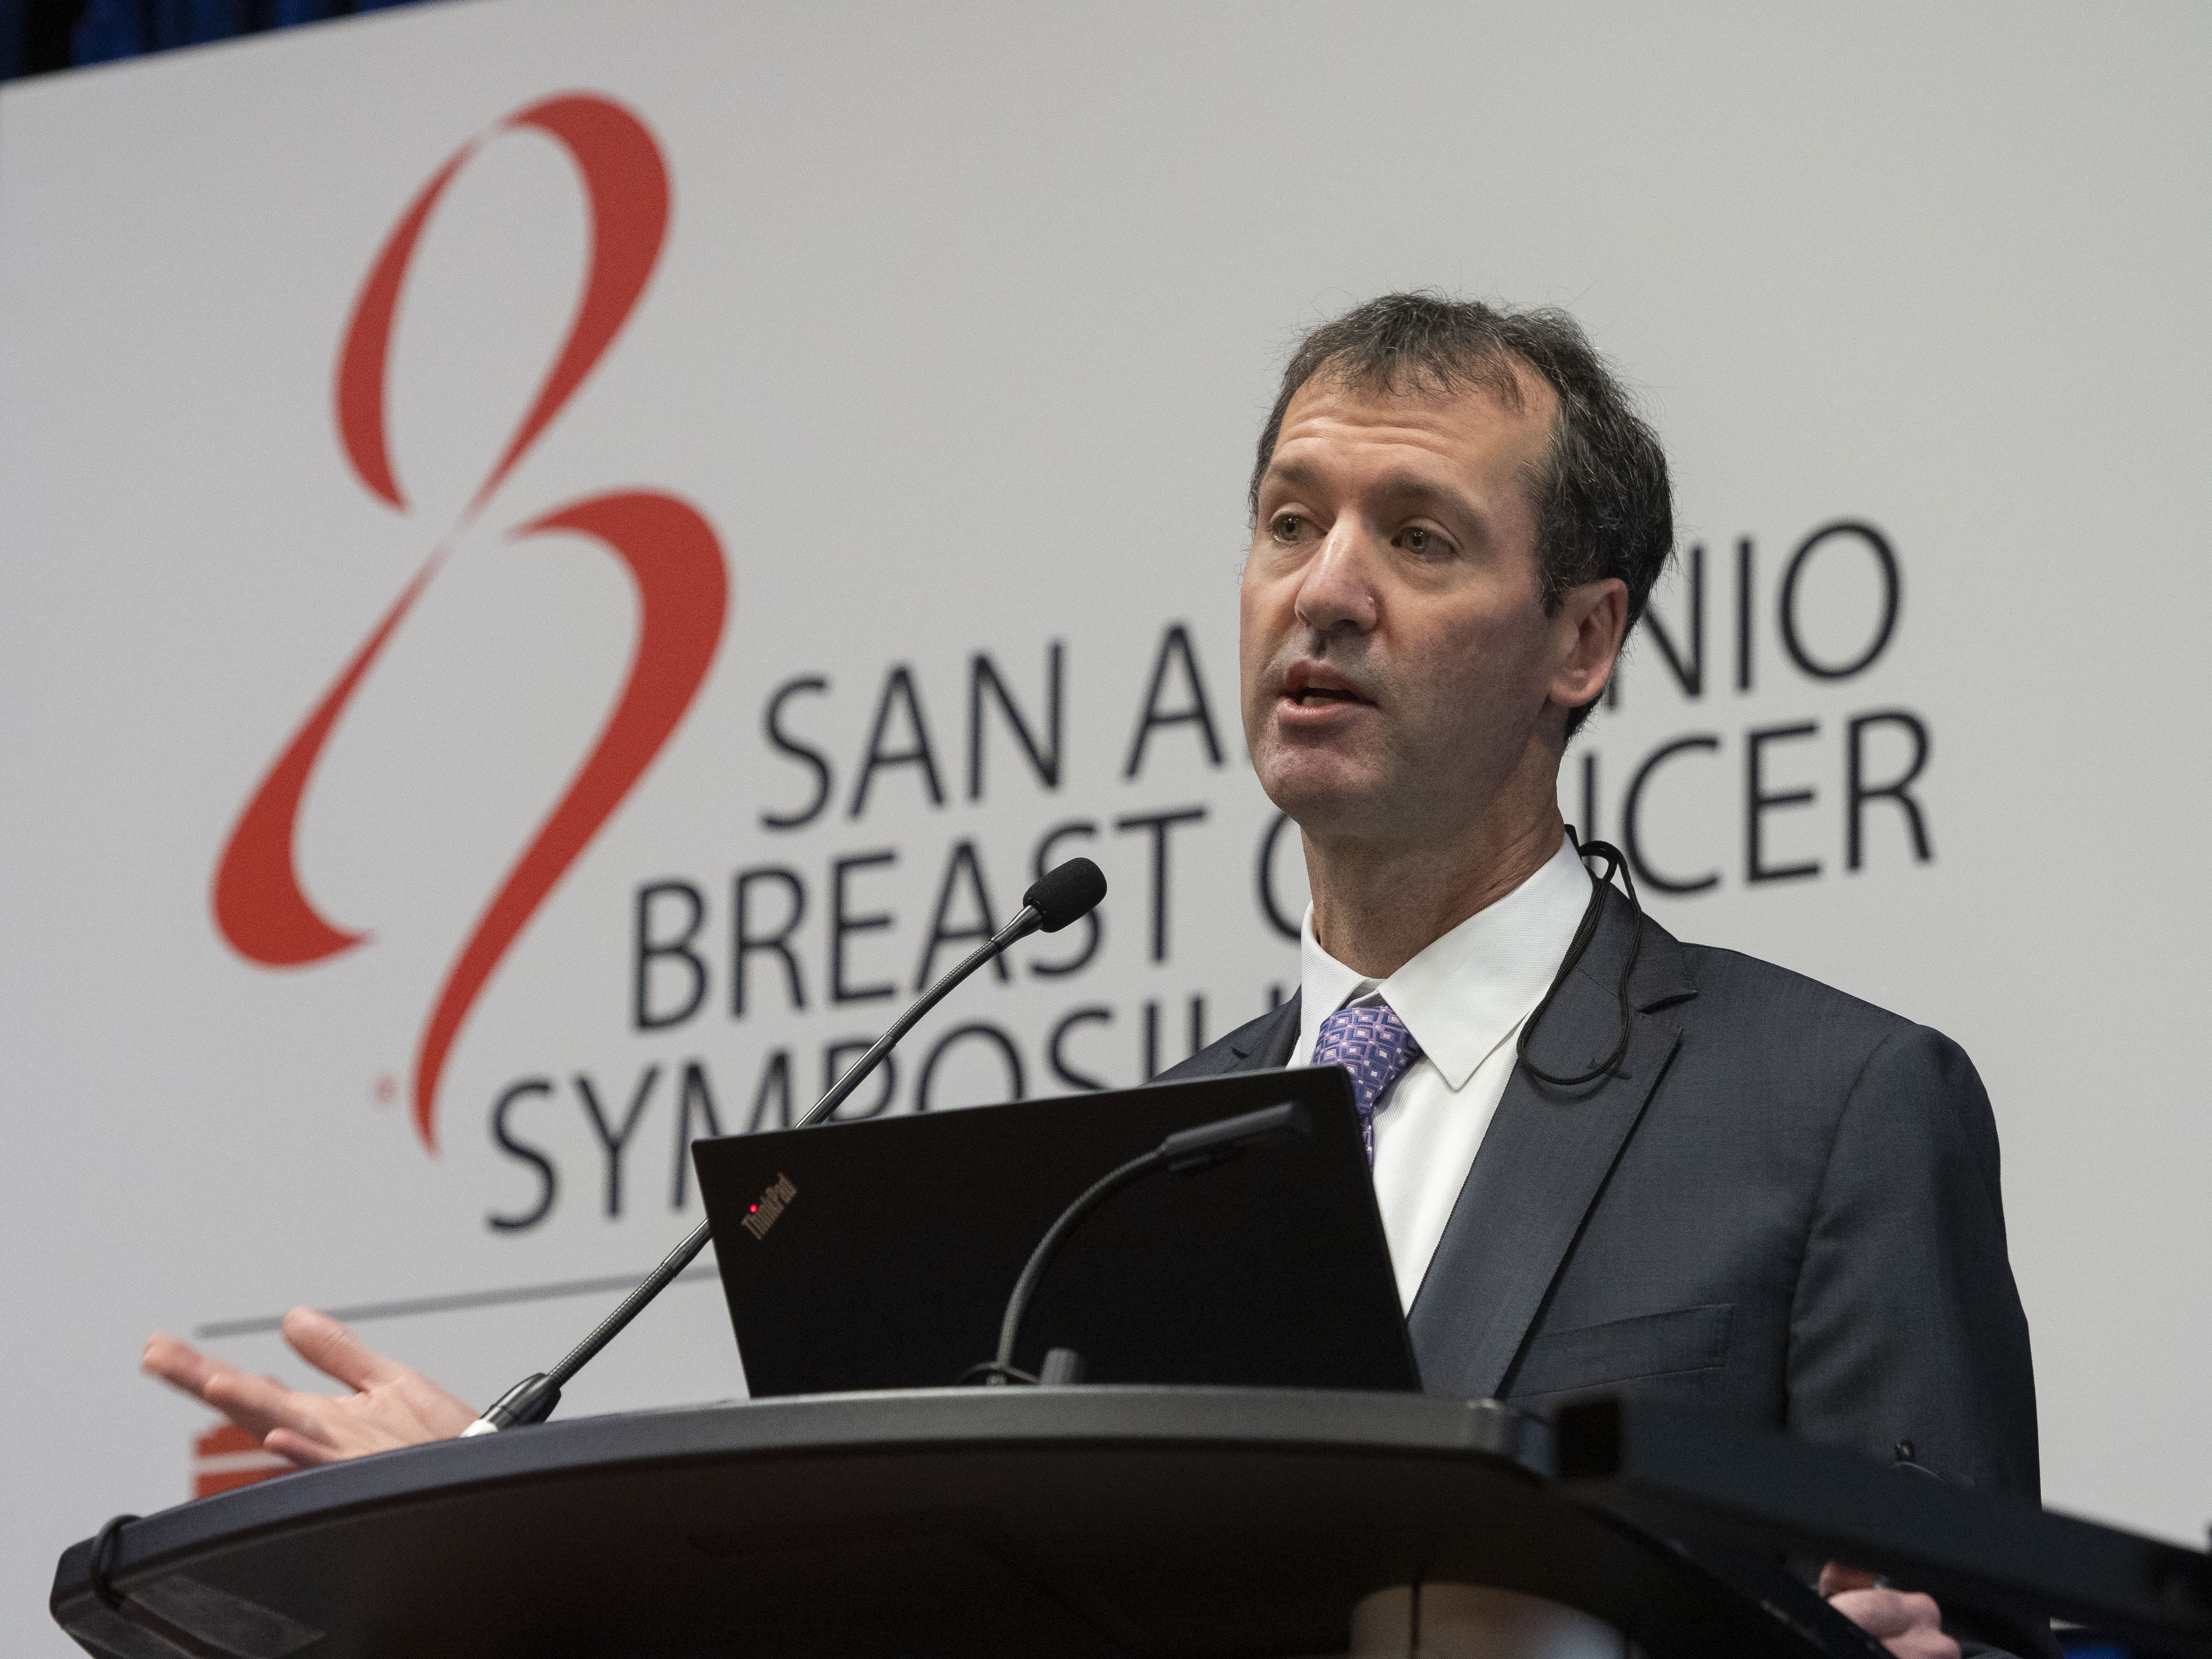 Highlights from SABCS Annual Symposium 2019: HER2-Positive Breast Cancer Updates